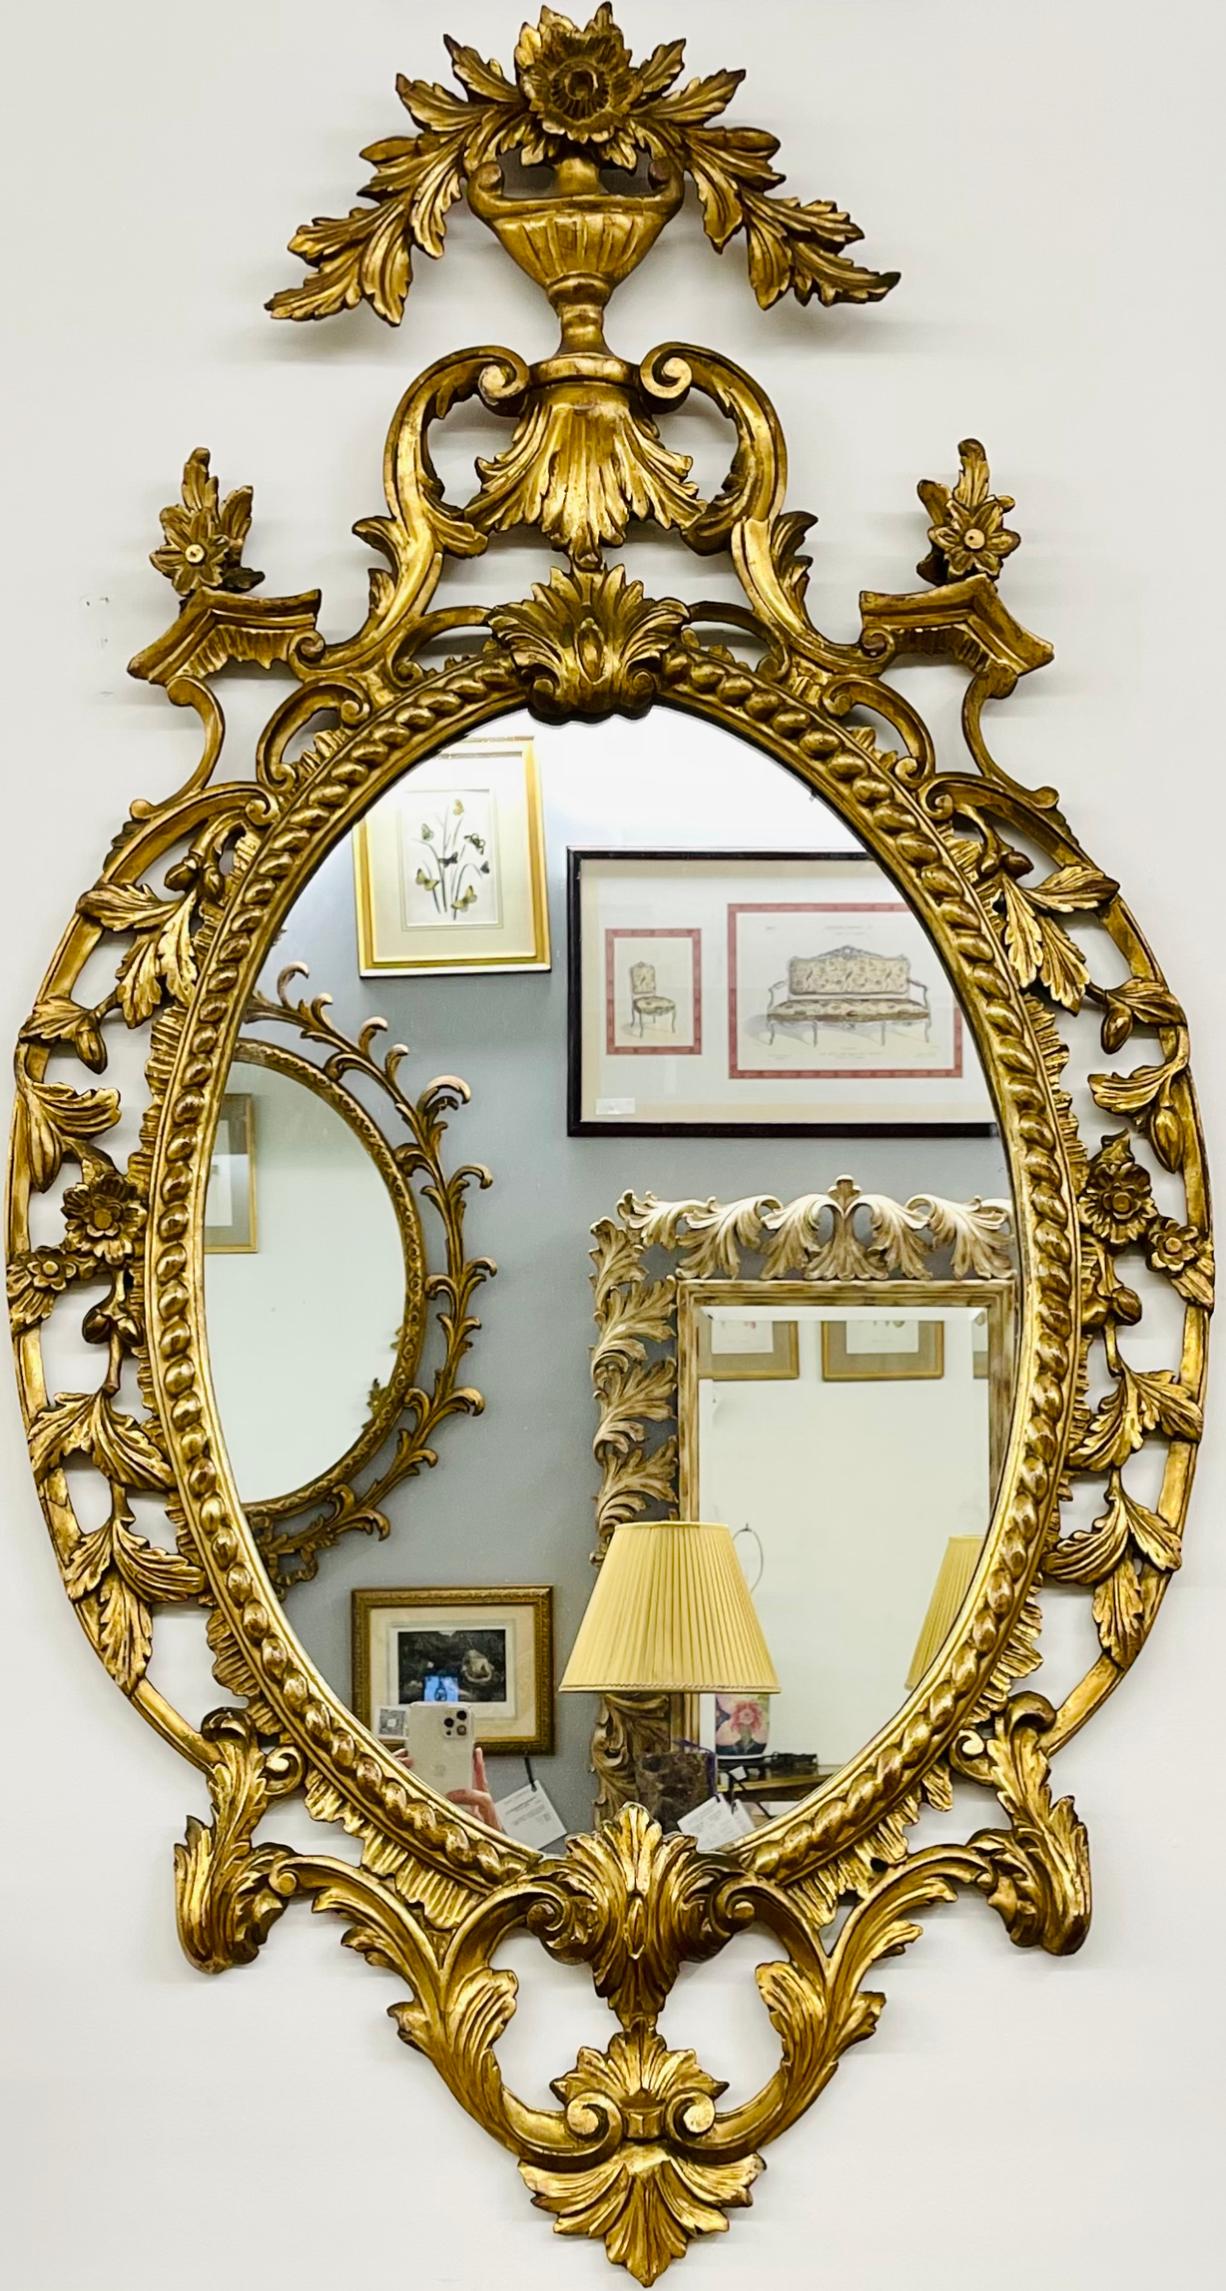 Pair gilt wood mirrors. Each wall or console mirror having a clear center mirror flanked by a frame of pierced carved gilt wood decorated shells, flowers and scroll design. This finely carved pair of Italian wall mirrors circa 1940s are certain to